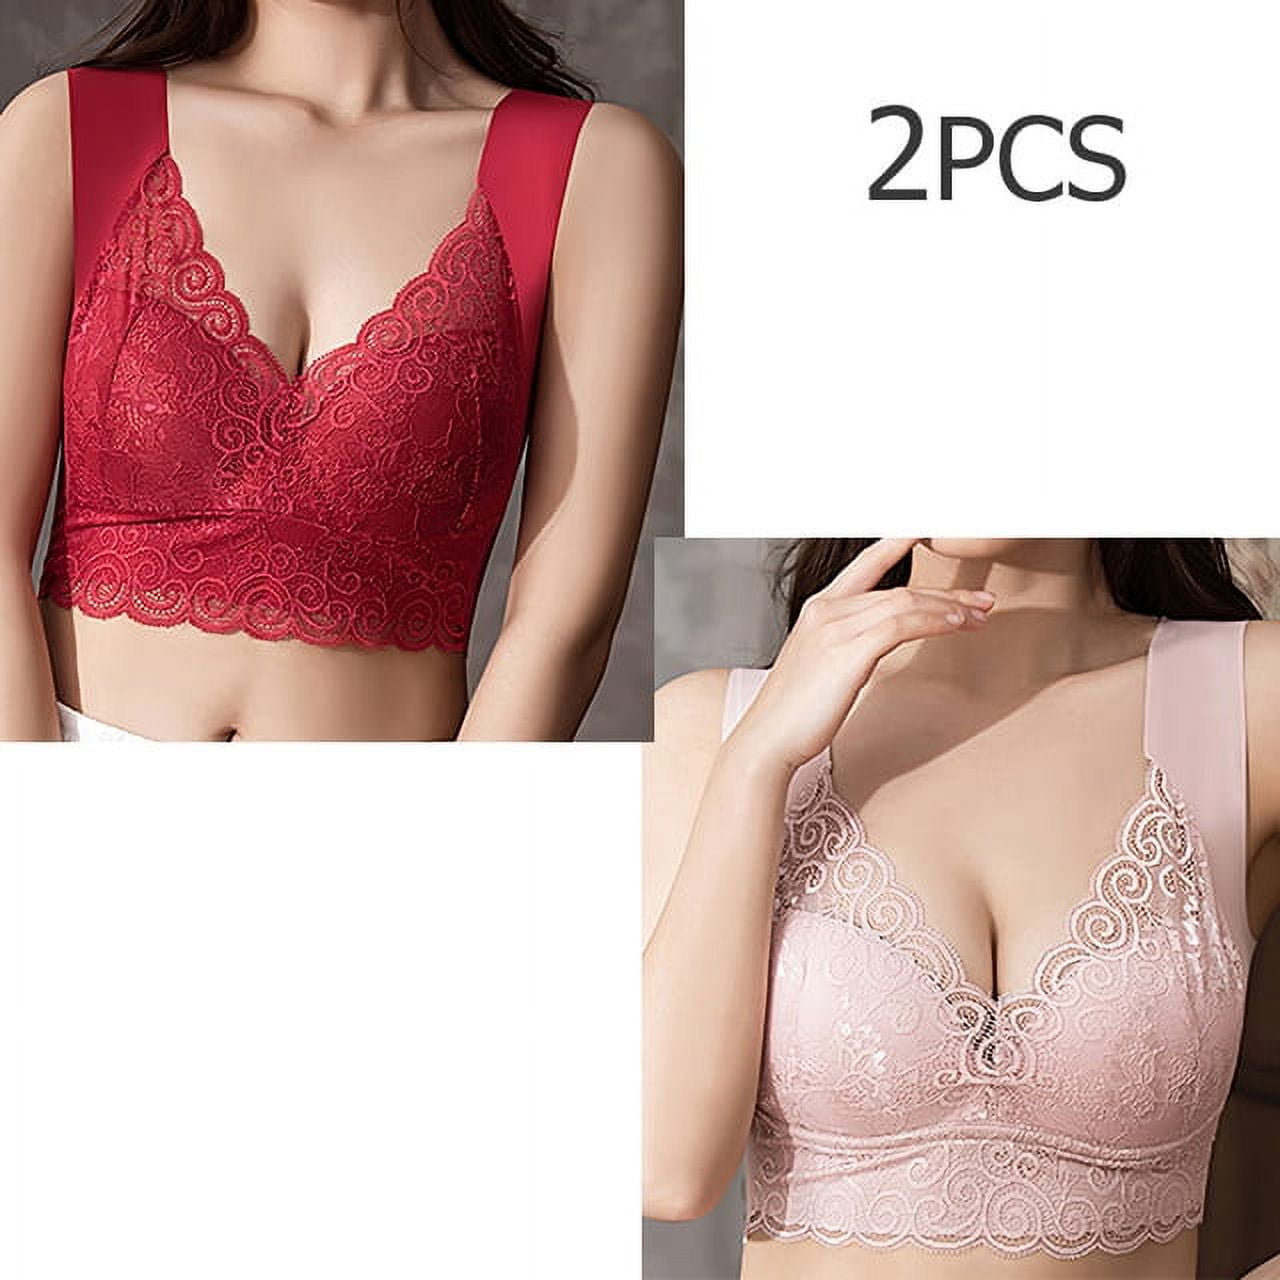 Plus Size Push Up Bra for Women, Lace Lingerie Sexy Brassiere with Front  Closure, Seamless Bralette, BH Comfort Top (M-5XL)